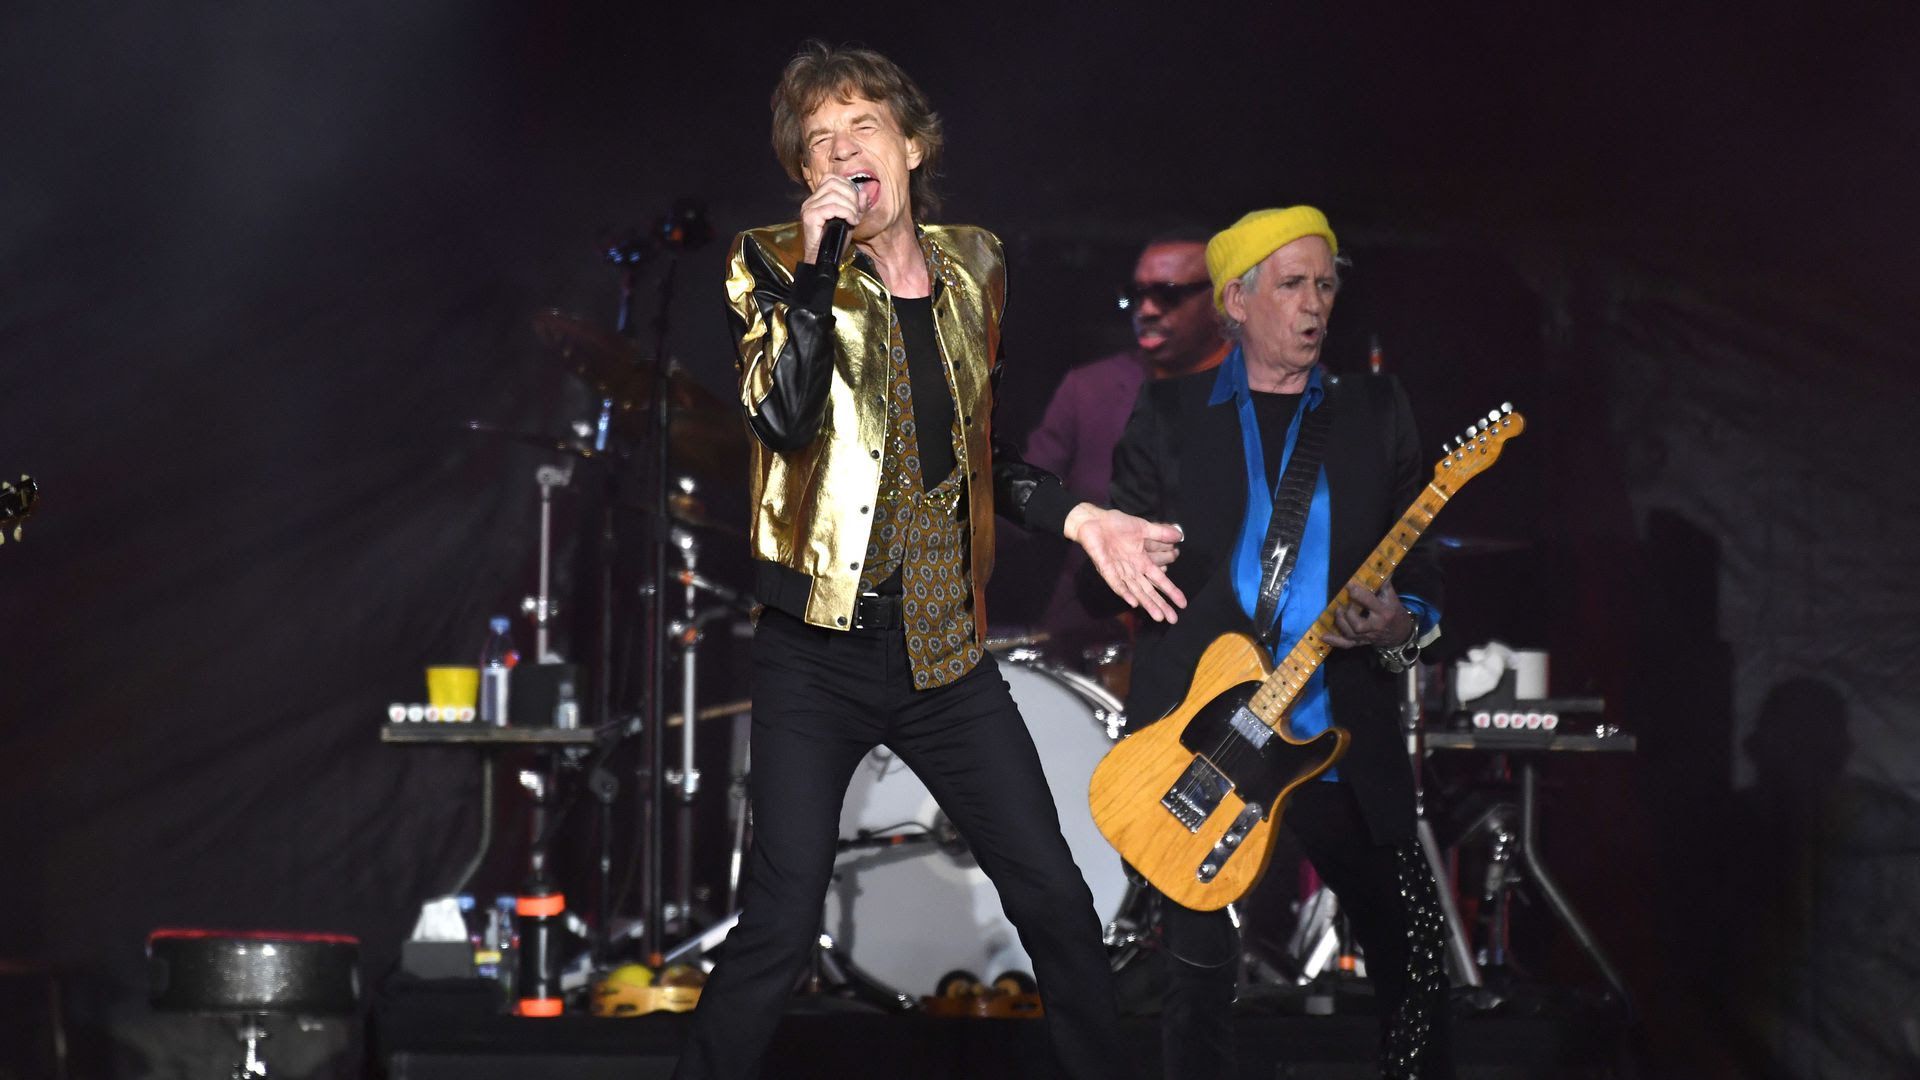 Mick Jagger sings on stage, wearing a gold bomber jacket.